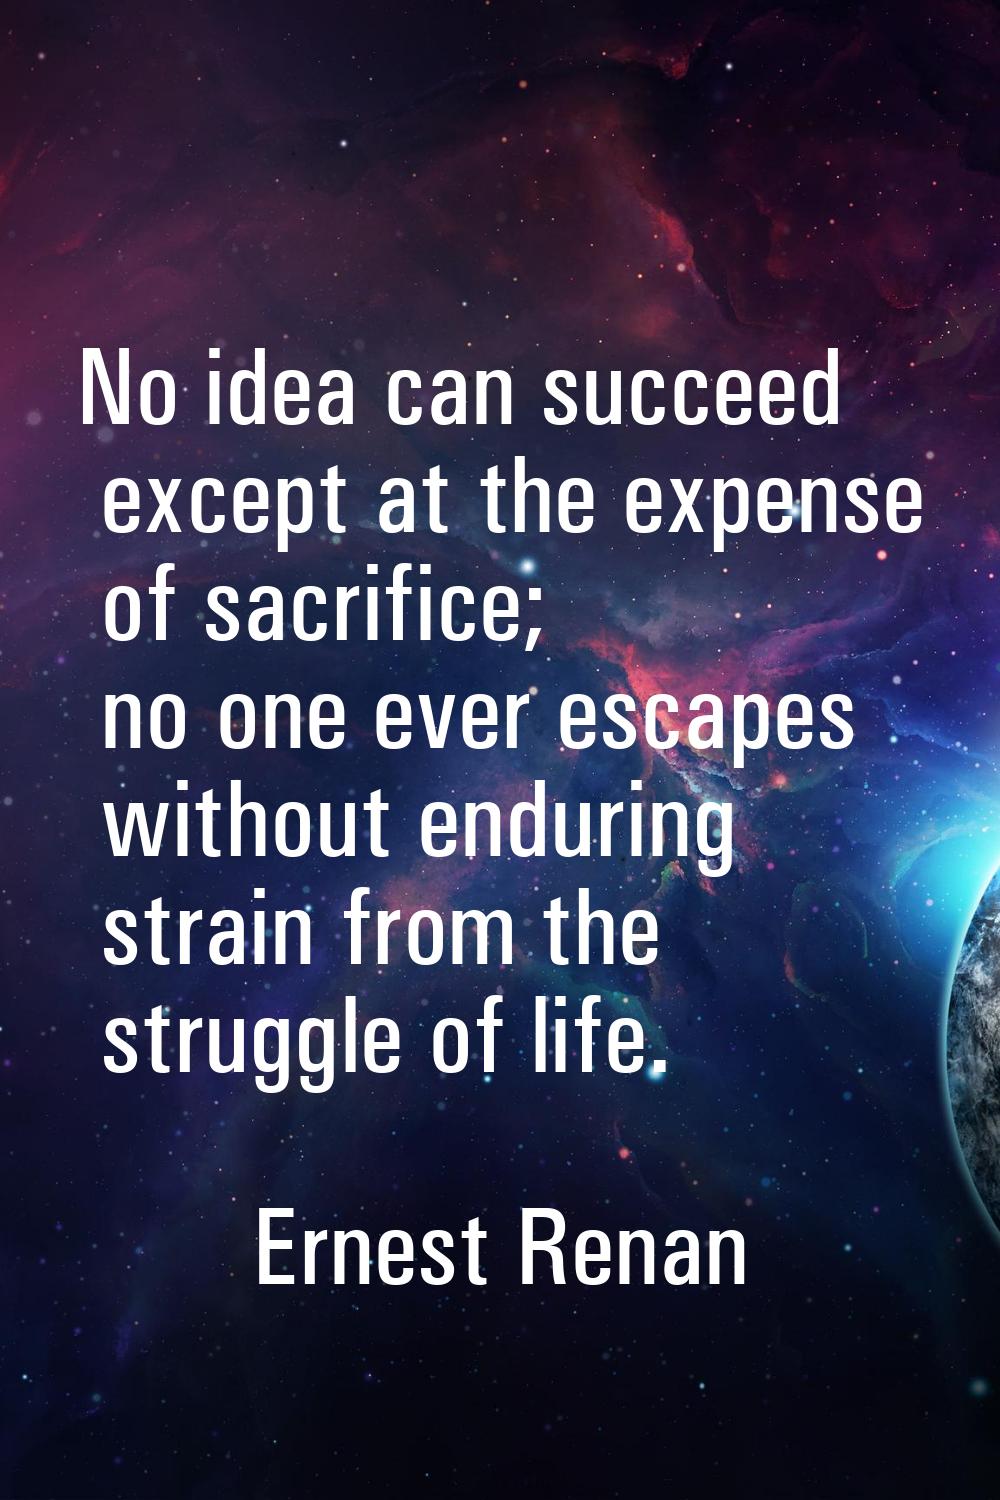 No idea can succeed except at the expense of sacrifice; no one ever escapes without enduring strain